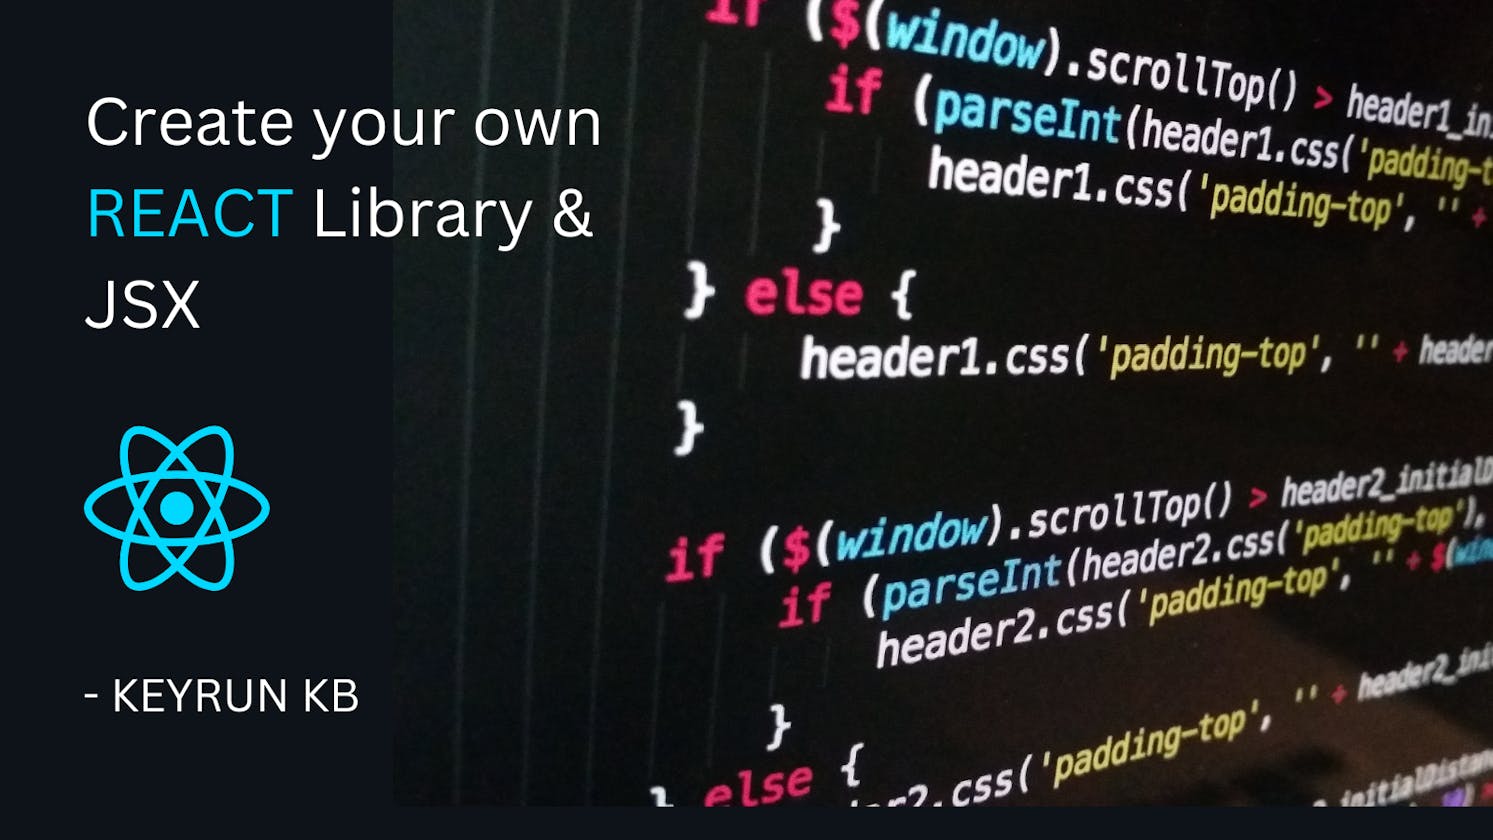 Create your own React Library & JSX